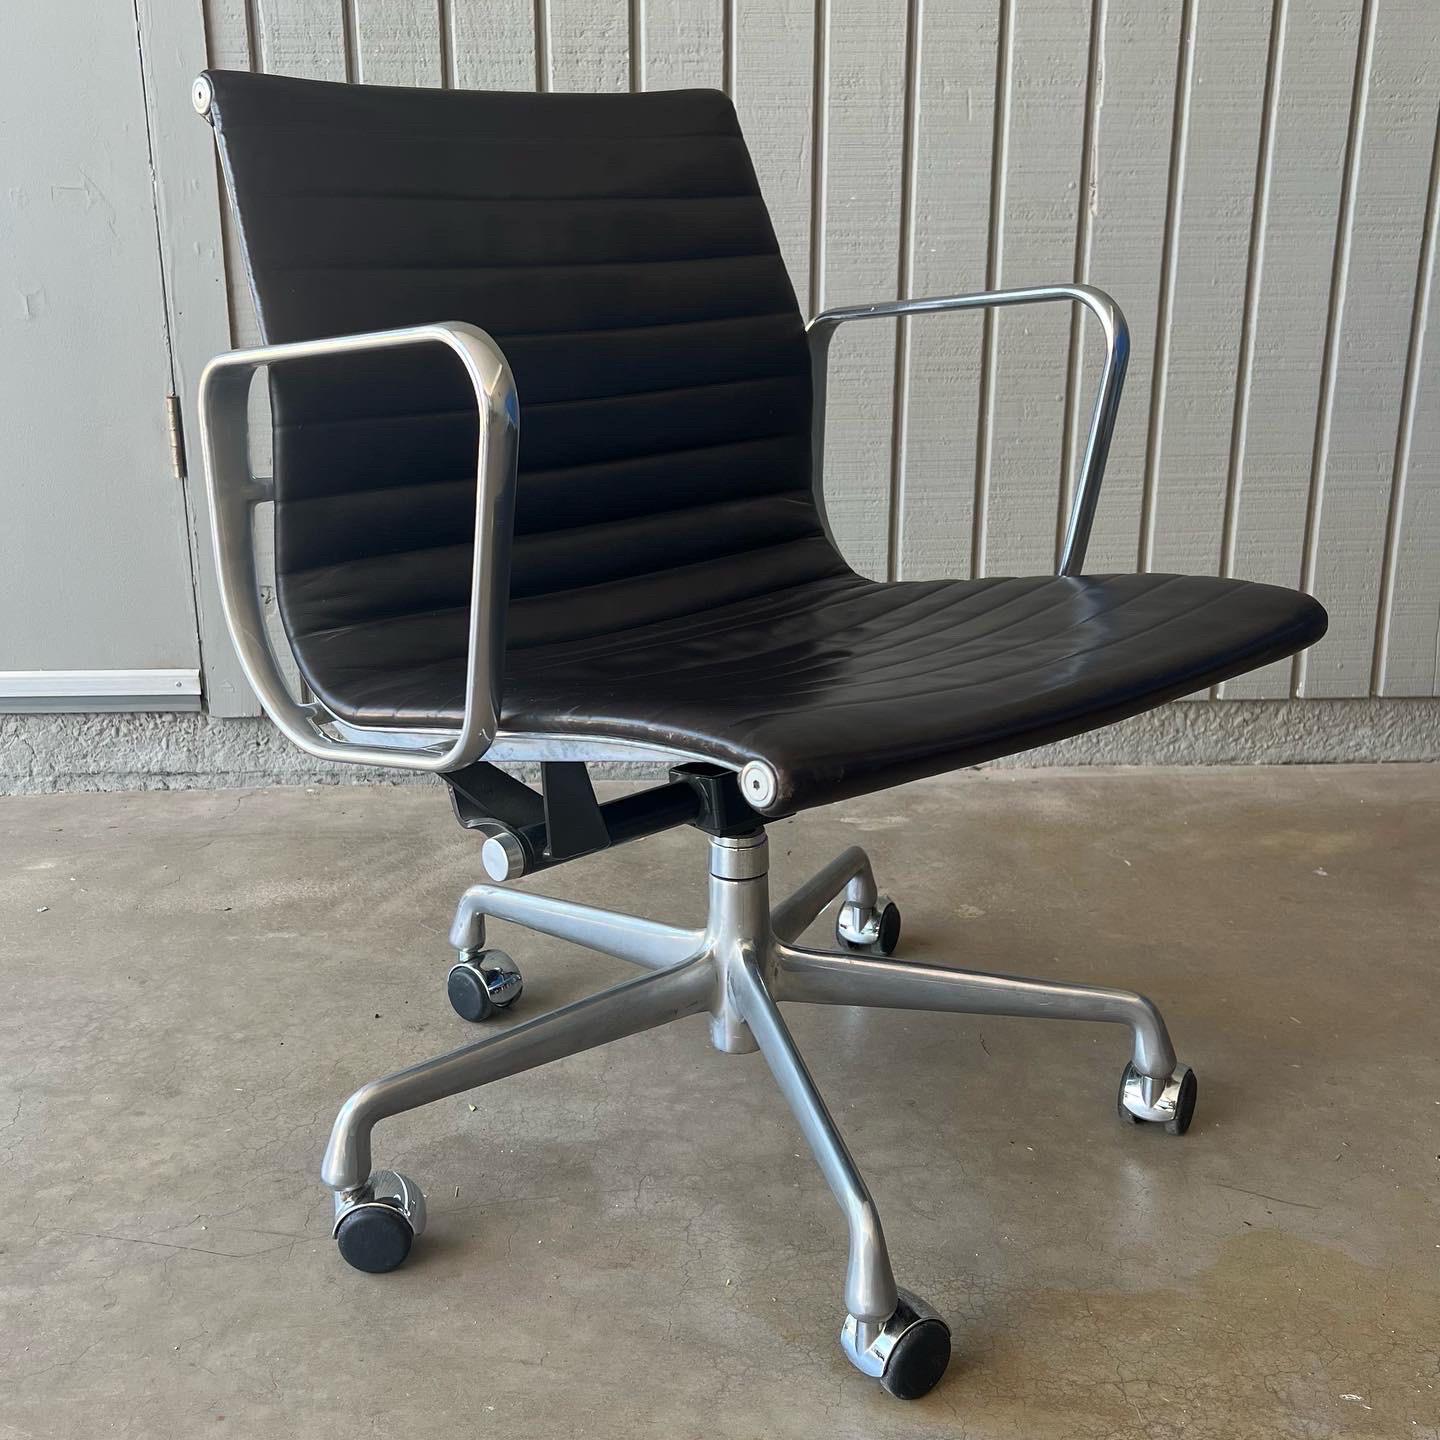 Eames Aluminum Group management chair for Herman Miller. I believe the color is Espresso or Slate (very dark grey/brown, almost black) Vicenza leather with a polished aluminum base on casters. Labeled as these were labeled in the early 2000s with a